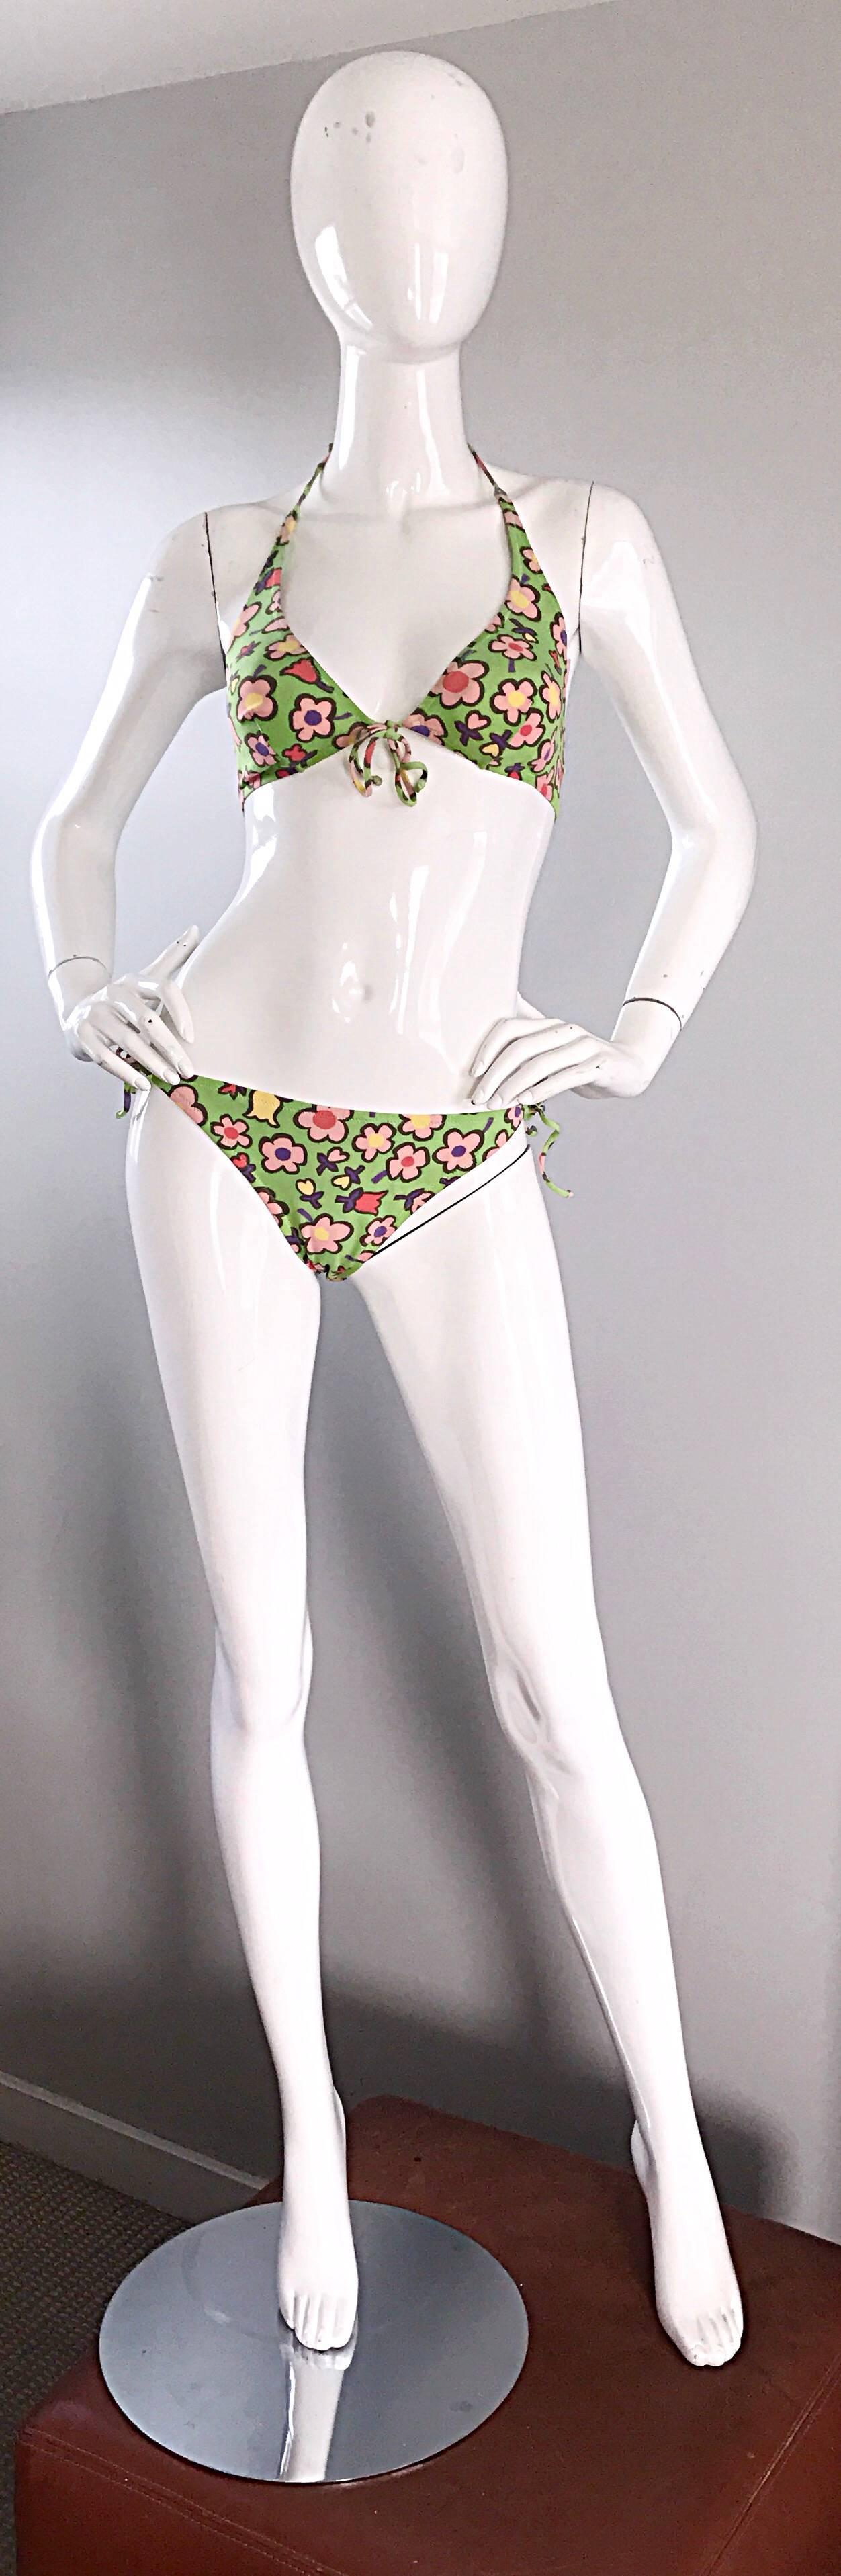 Vintage Moschino 1990s Neon Green Flower Printed 90s Two Piece String Bikini  For Sale 1